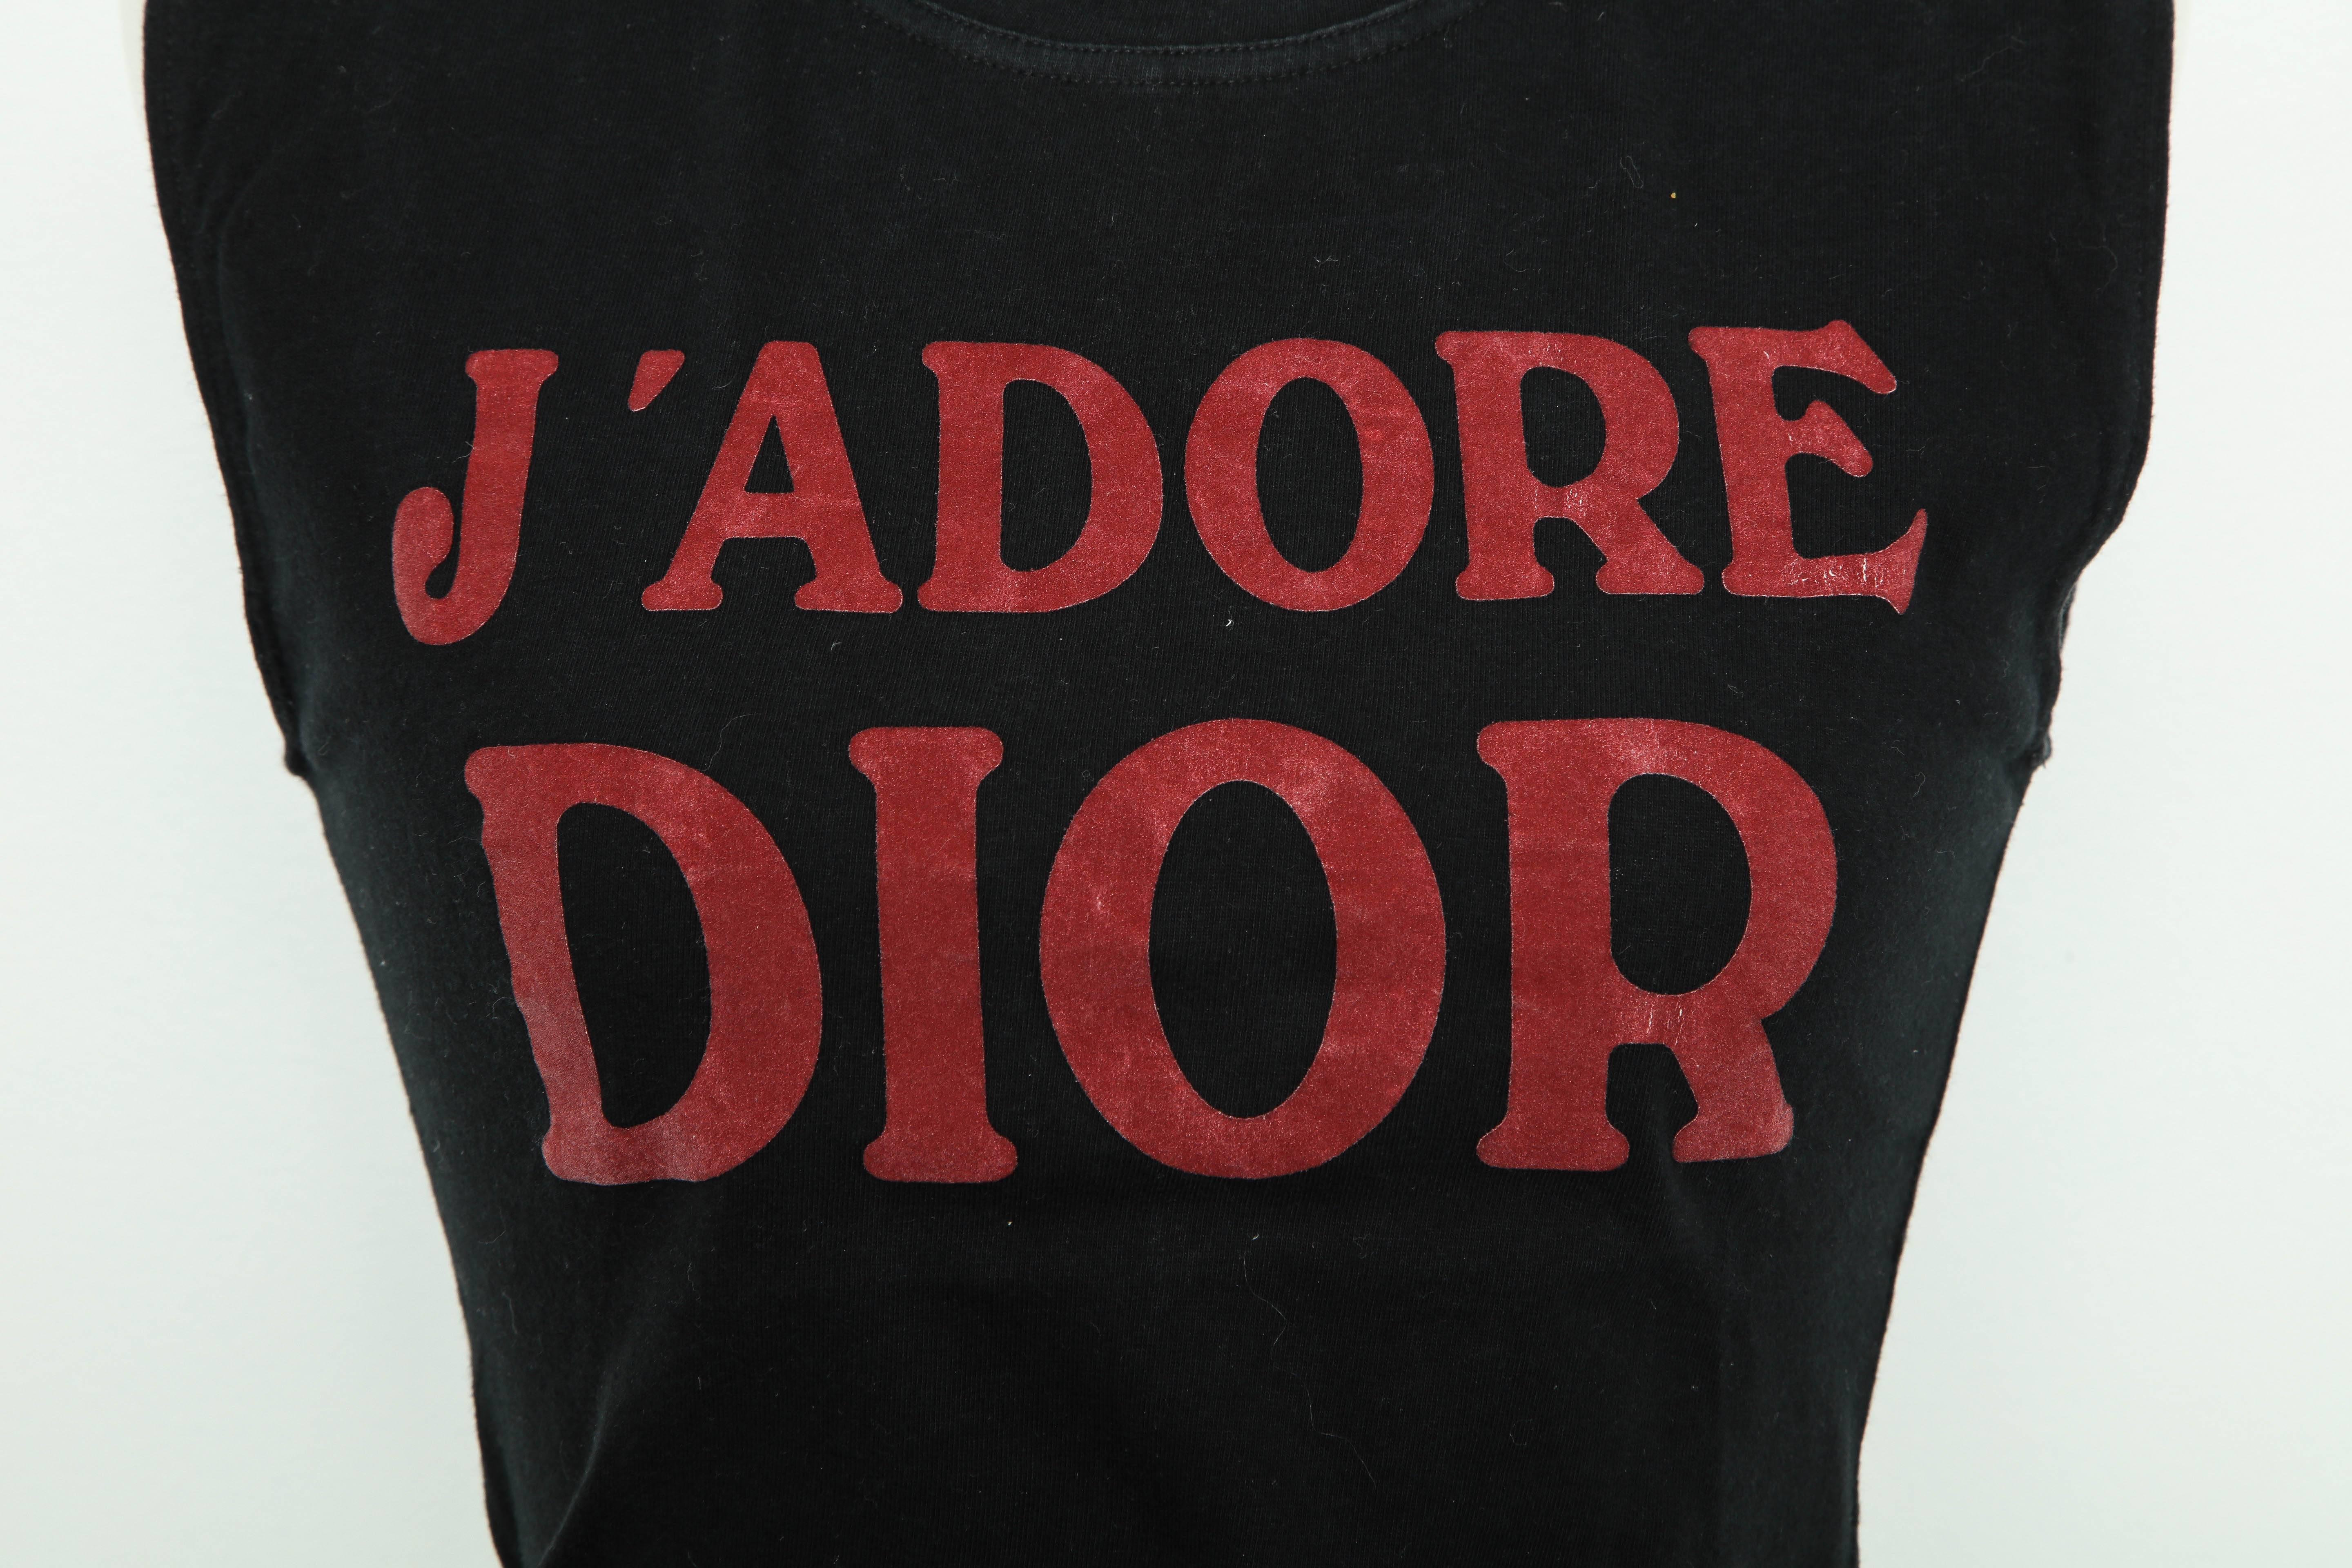 Christian Dior by John Galliano tank top with iconic 